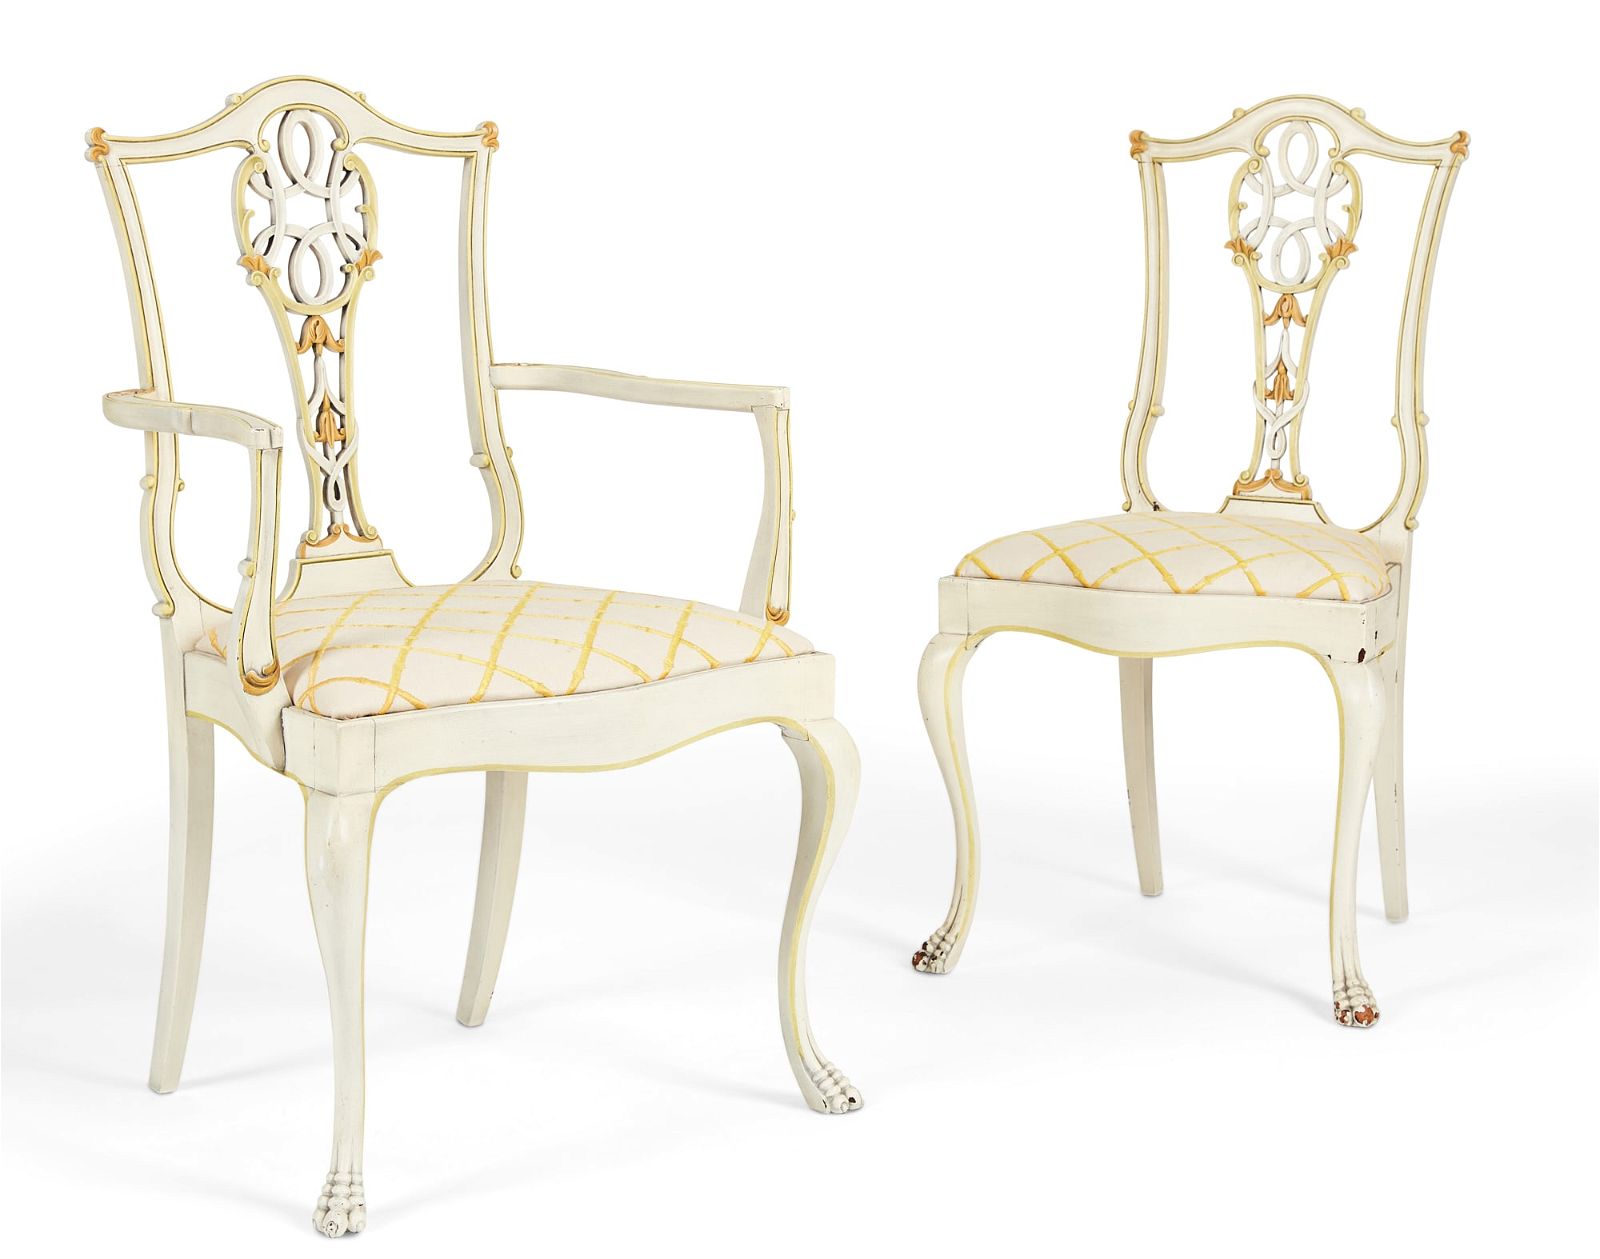 TWO GEORGE III STYLE PAINTED CHAIRSTwo